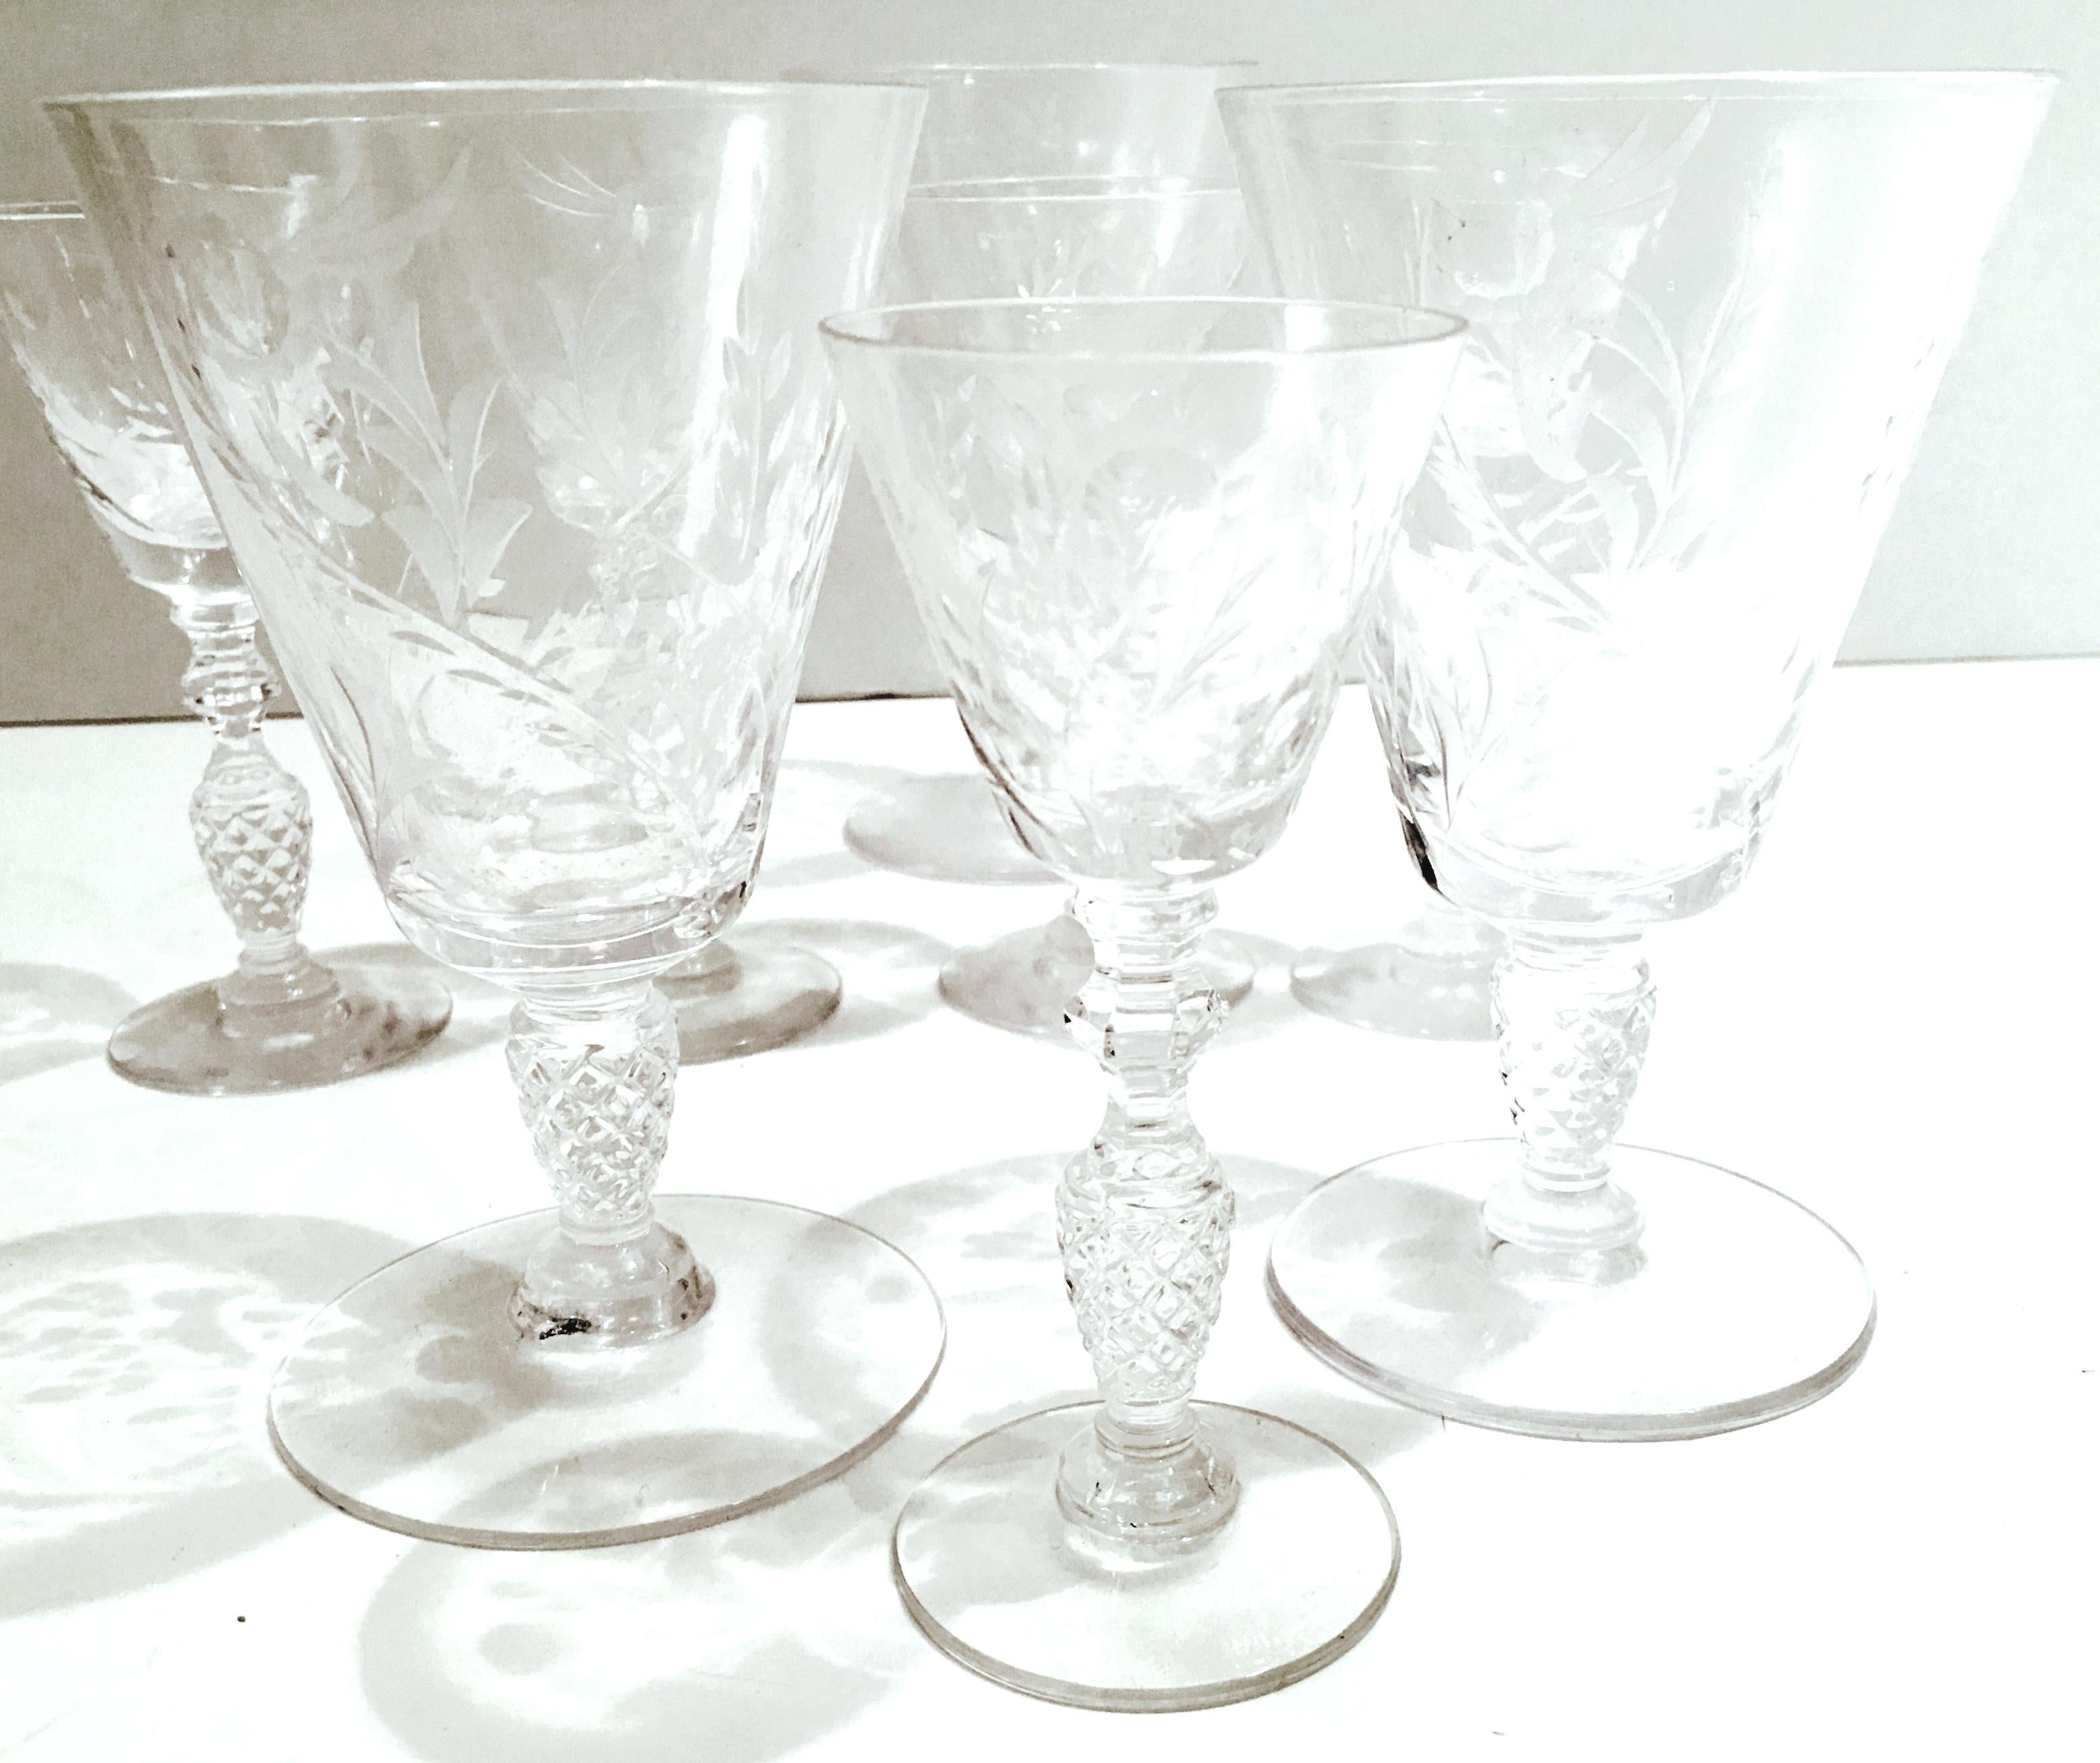 Mid-20th Century American cut and etched crystal stem glasses set of eight pieces. Features an etched floral and vine pattern with cut and faceted detail to the stem and a smooth foot. Set includes, five cordial glasses and three goblet